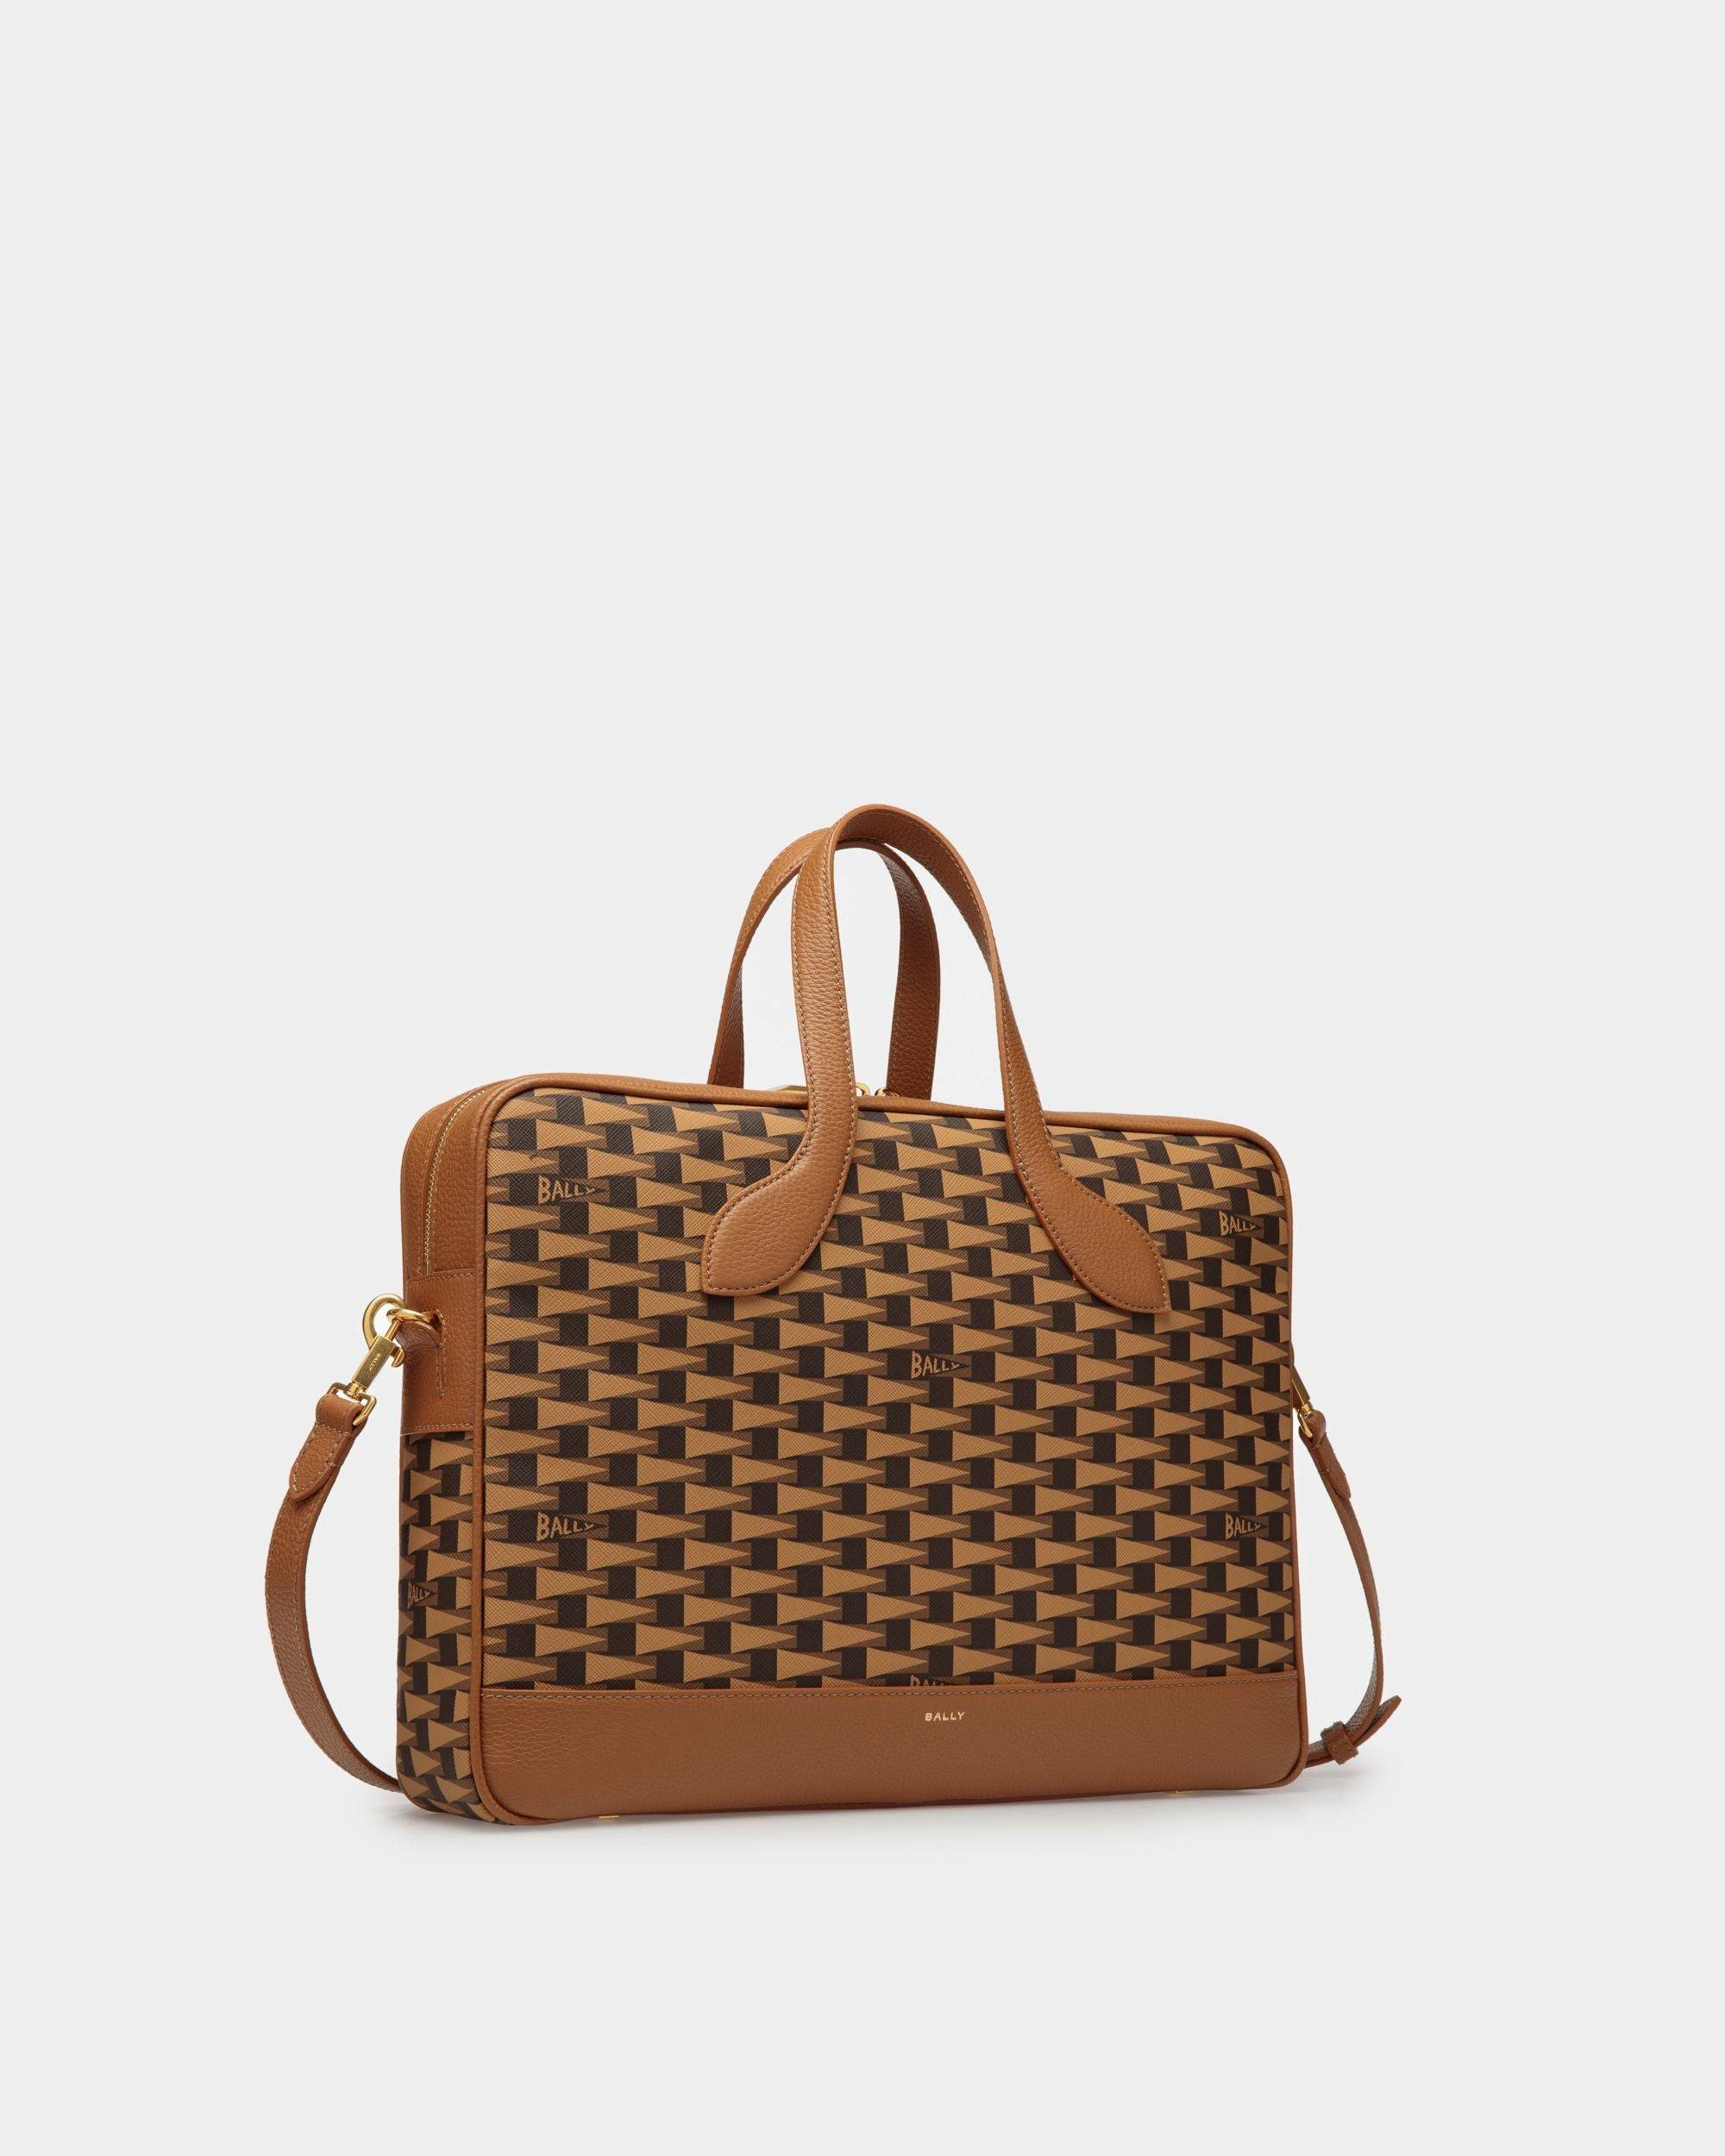 Easy Brief | Men's Business Bag | Desert Leather And TPU | Bally | Still Life 3/4 Front